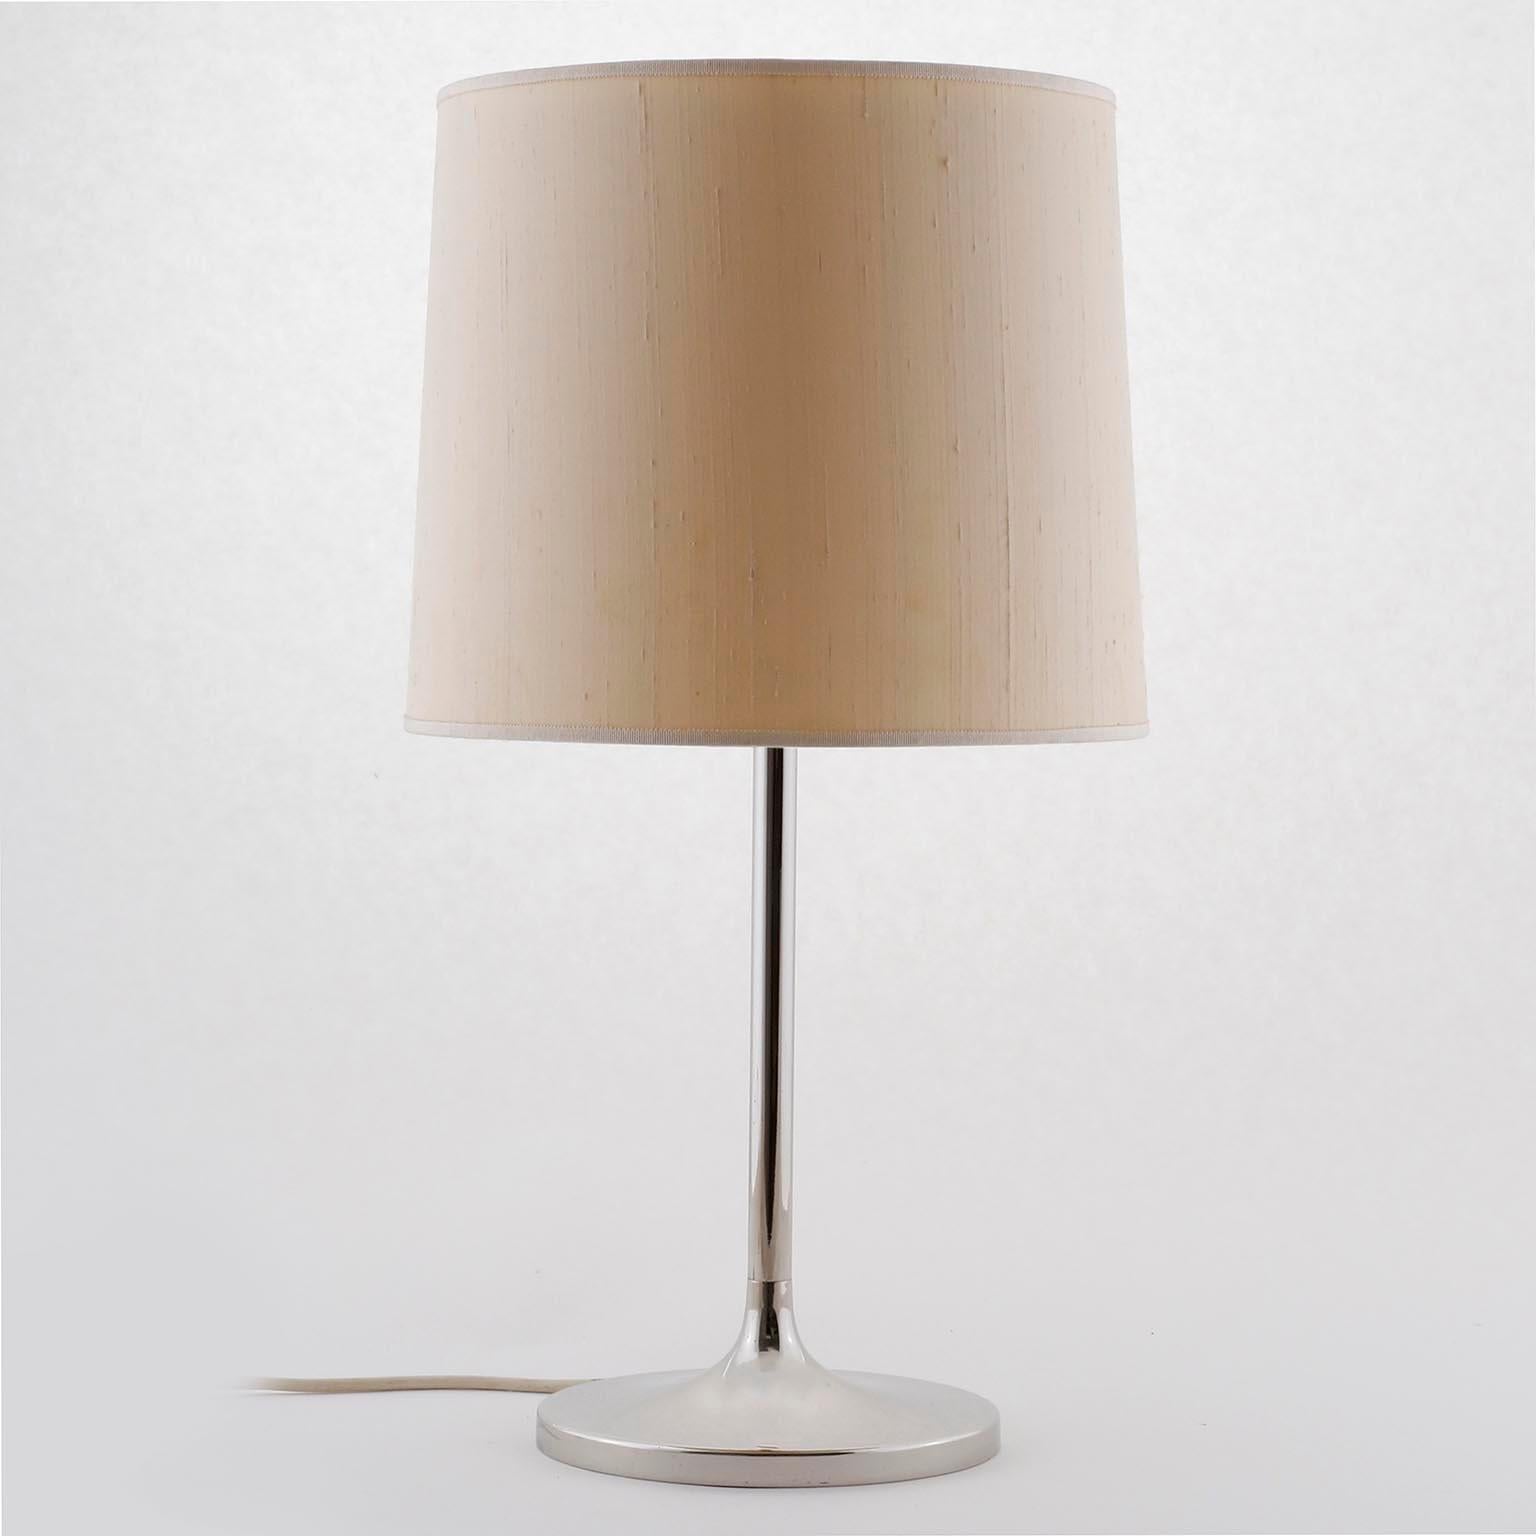 Austrian Pair of Kalmar Table Lamps with Tulip Base, Polished Nickel, Beige Shade, 1970 For Sale